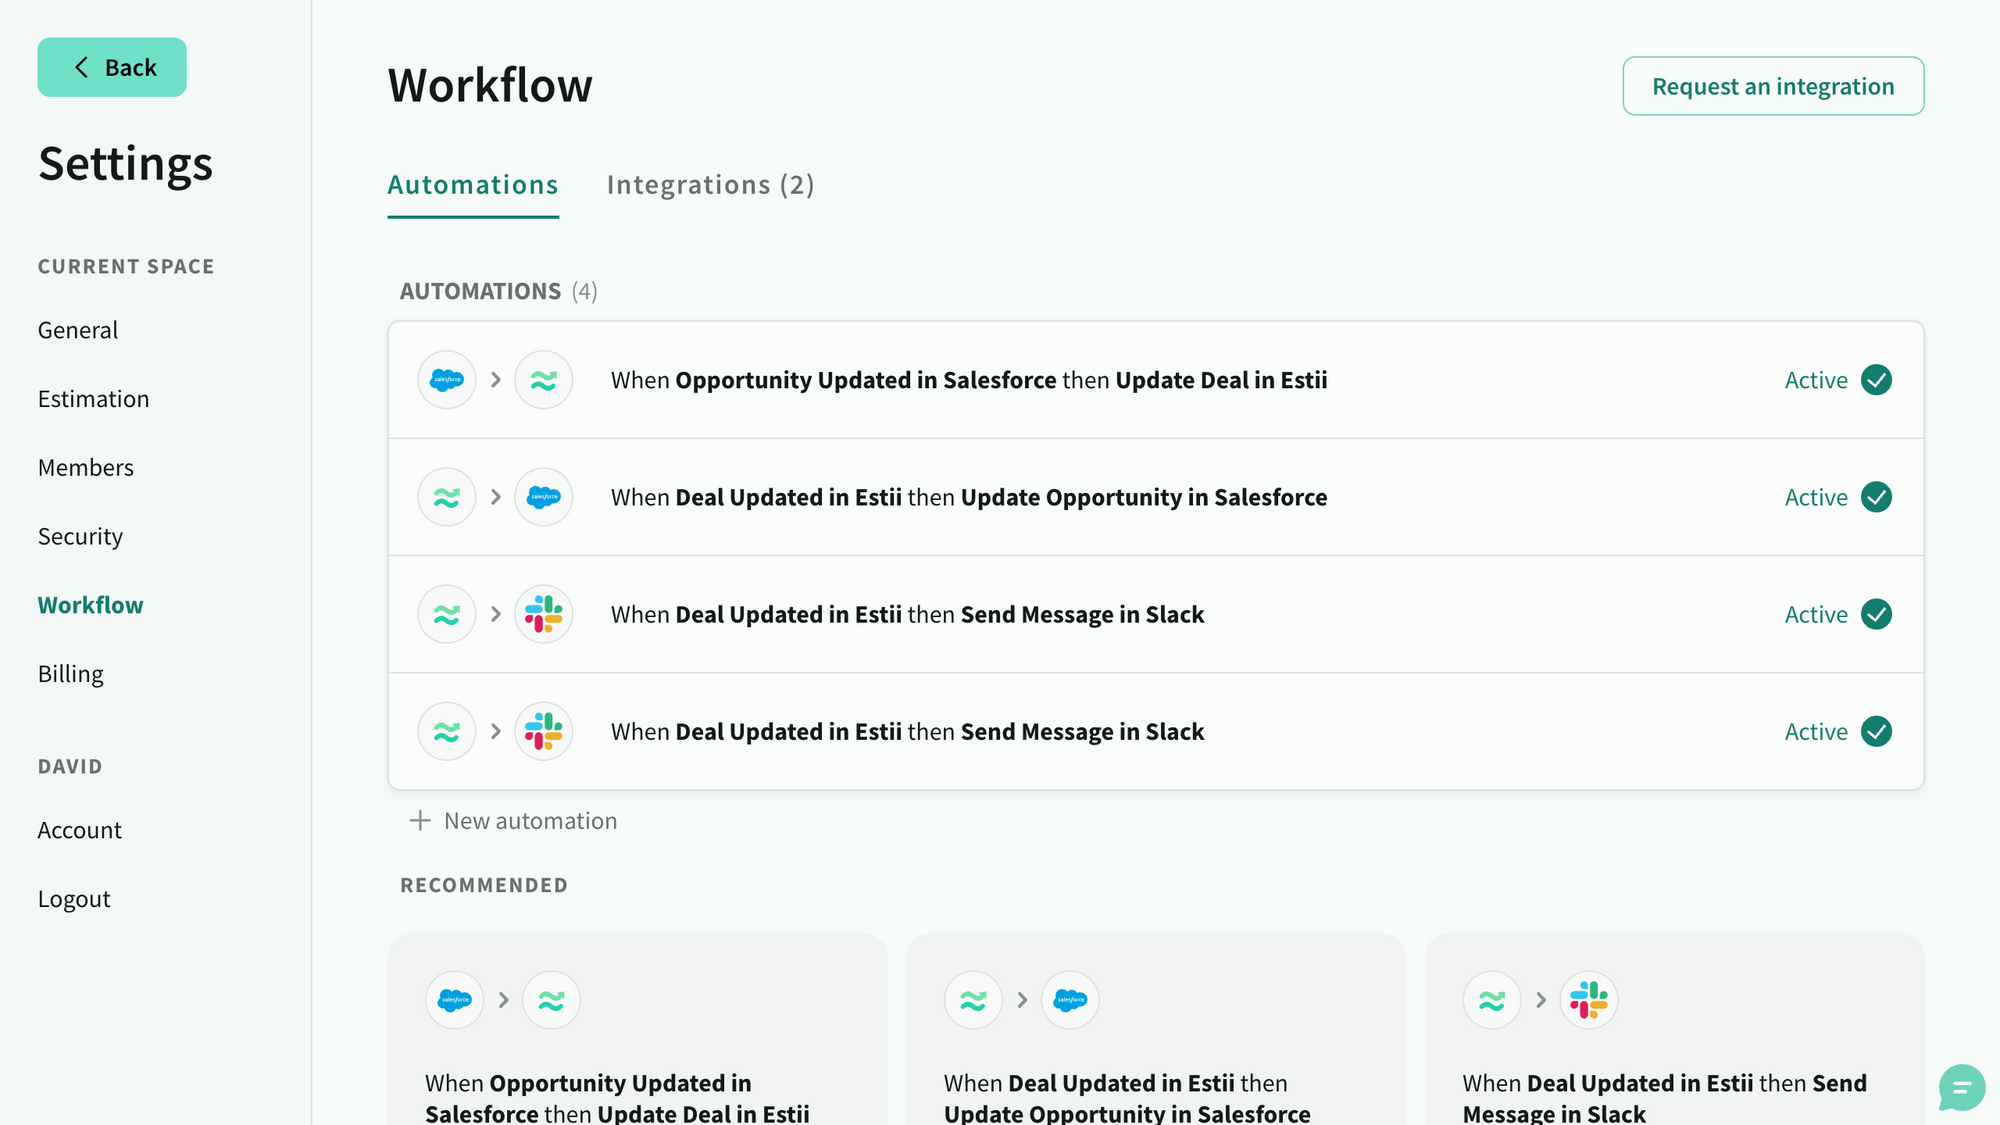 Access automations and integrations from the **workflow** page